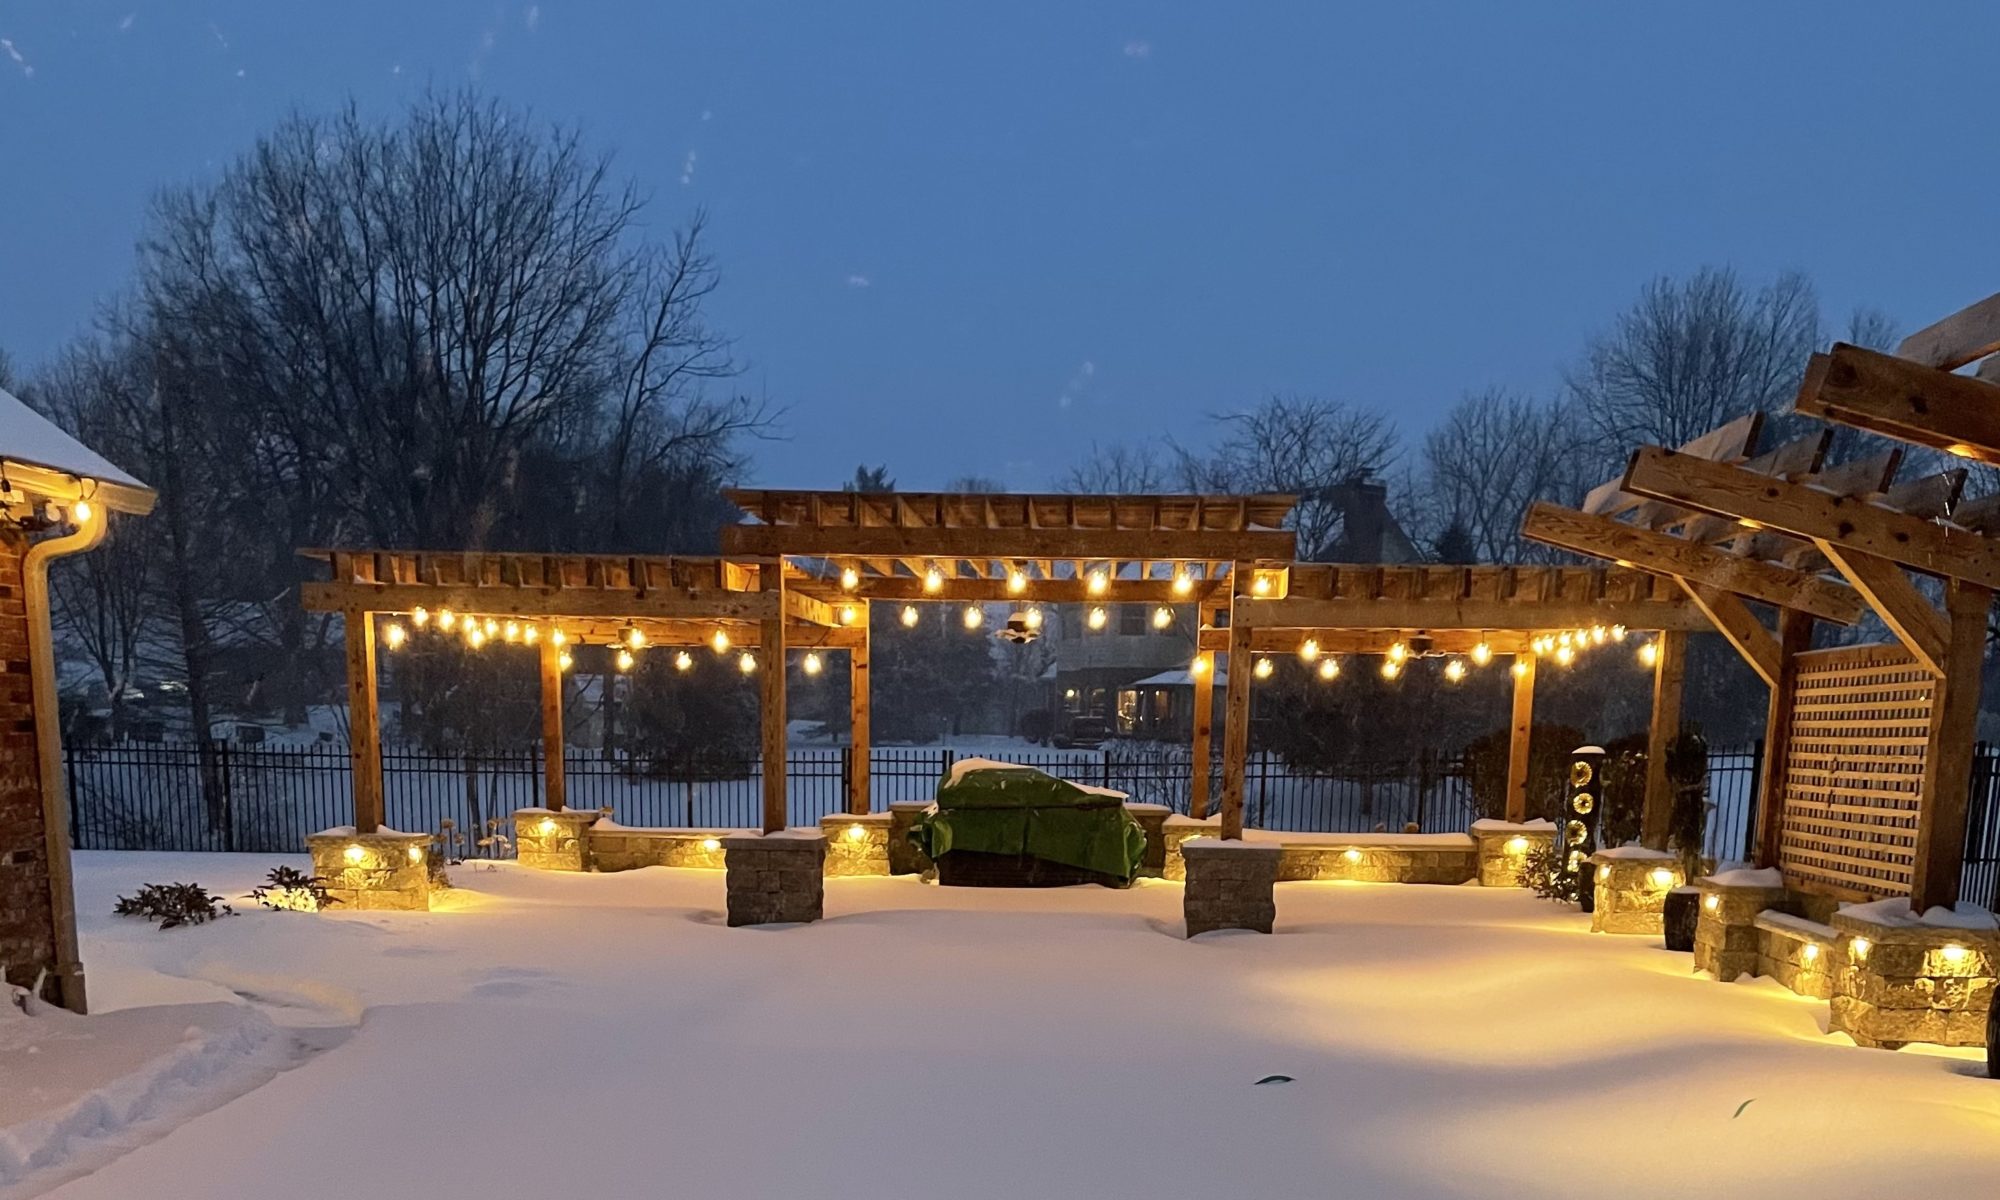 Precision Outdoors cannon cabana nights completed project night night time pool life fire table fire pit pool deck pergola outdoor kitchen timber structures retaining wall sun screens privacy screens outdoor dining entertaining space Greenwood Indiana snow winter cabana